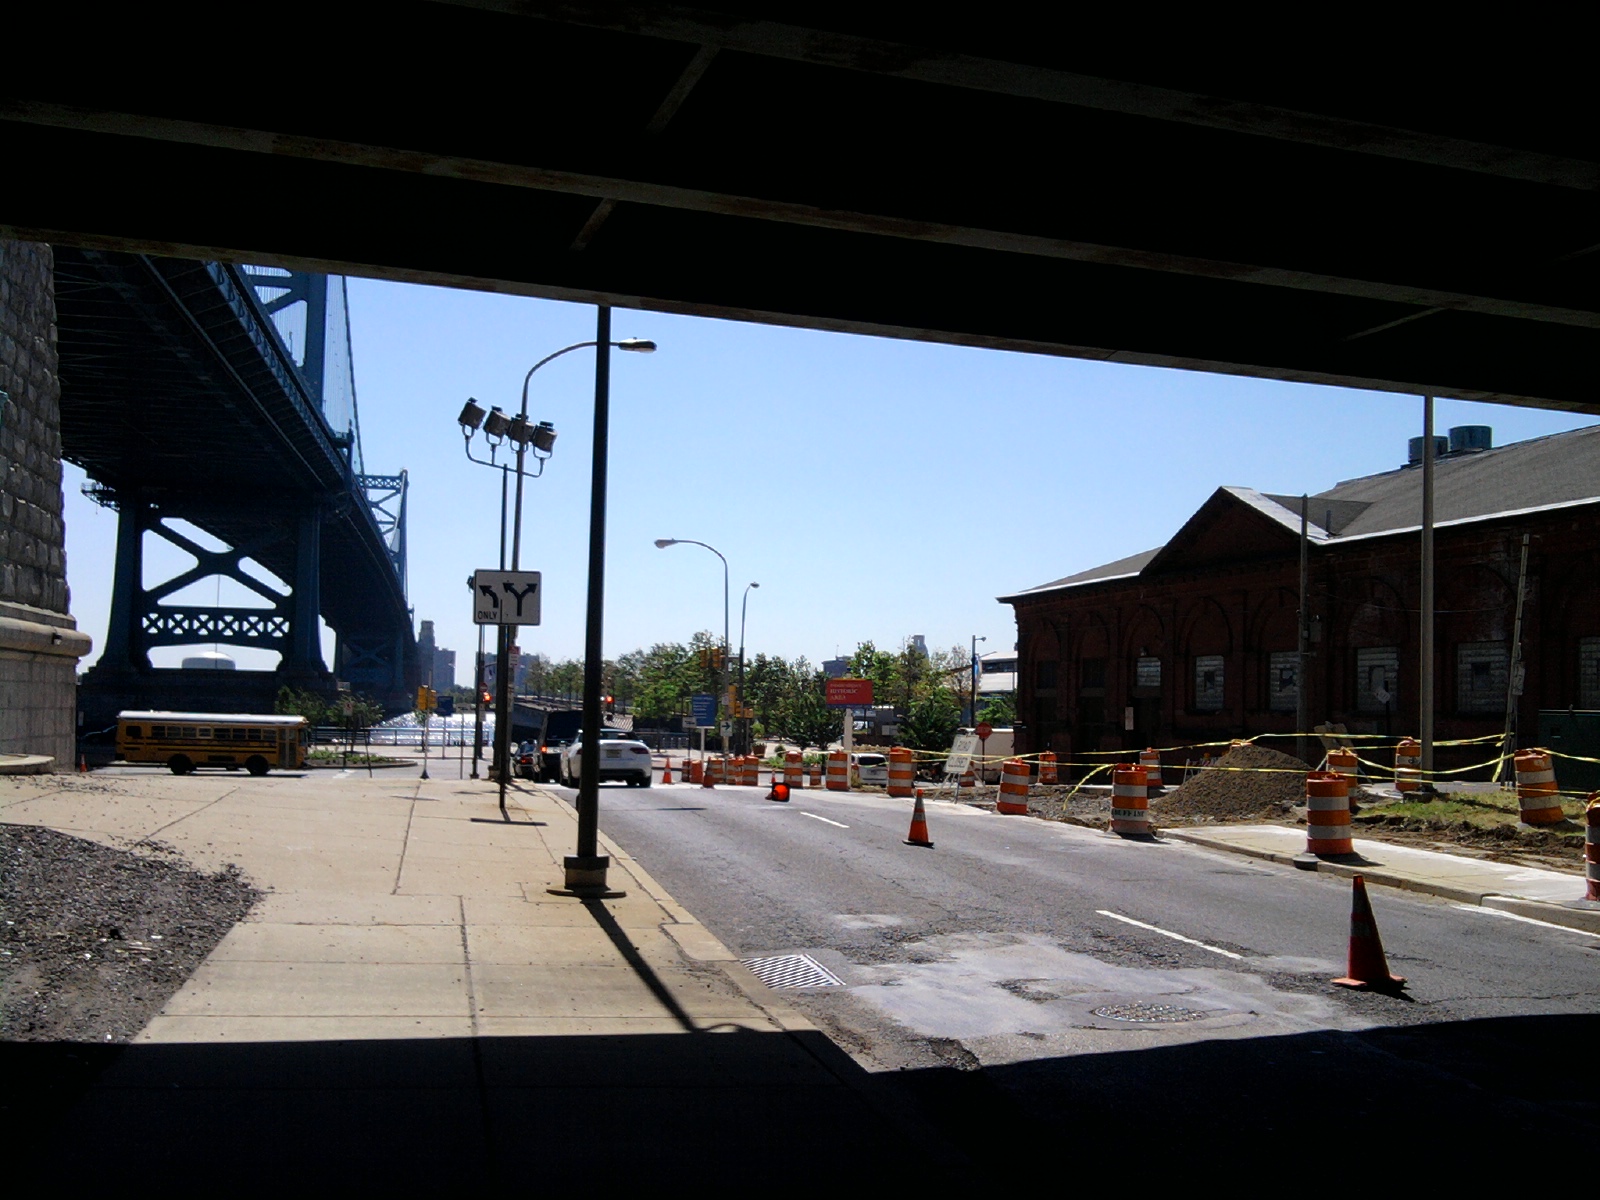 The view from beneath the overpass, toward Race Street Pier